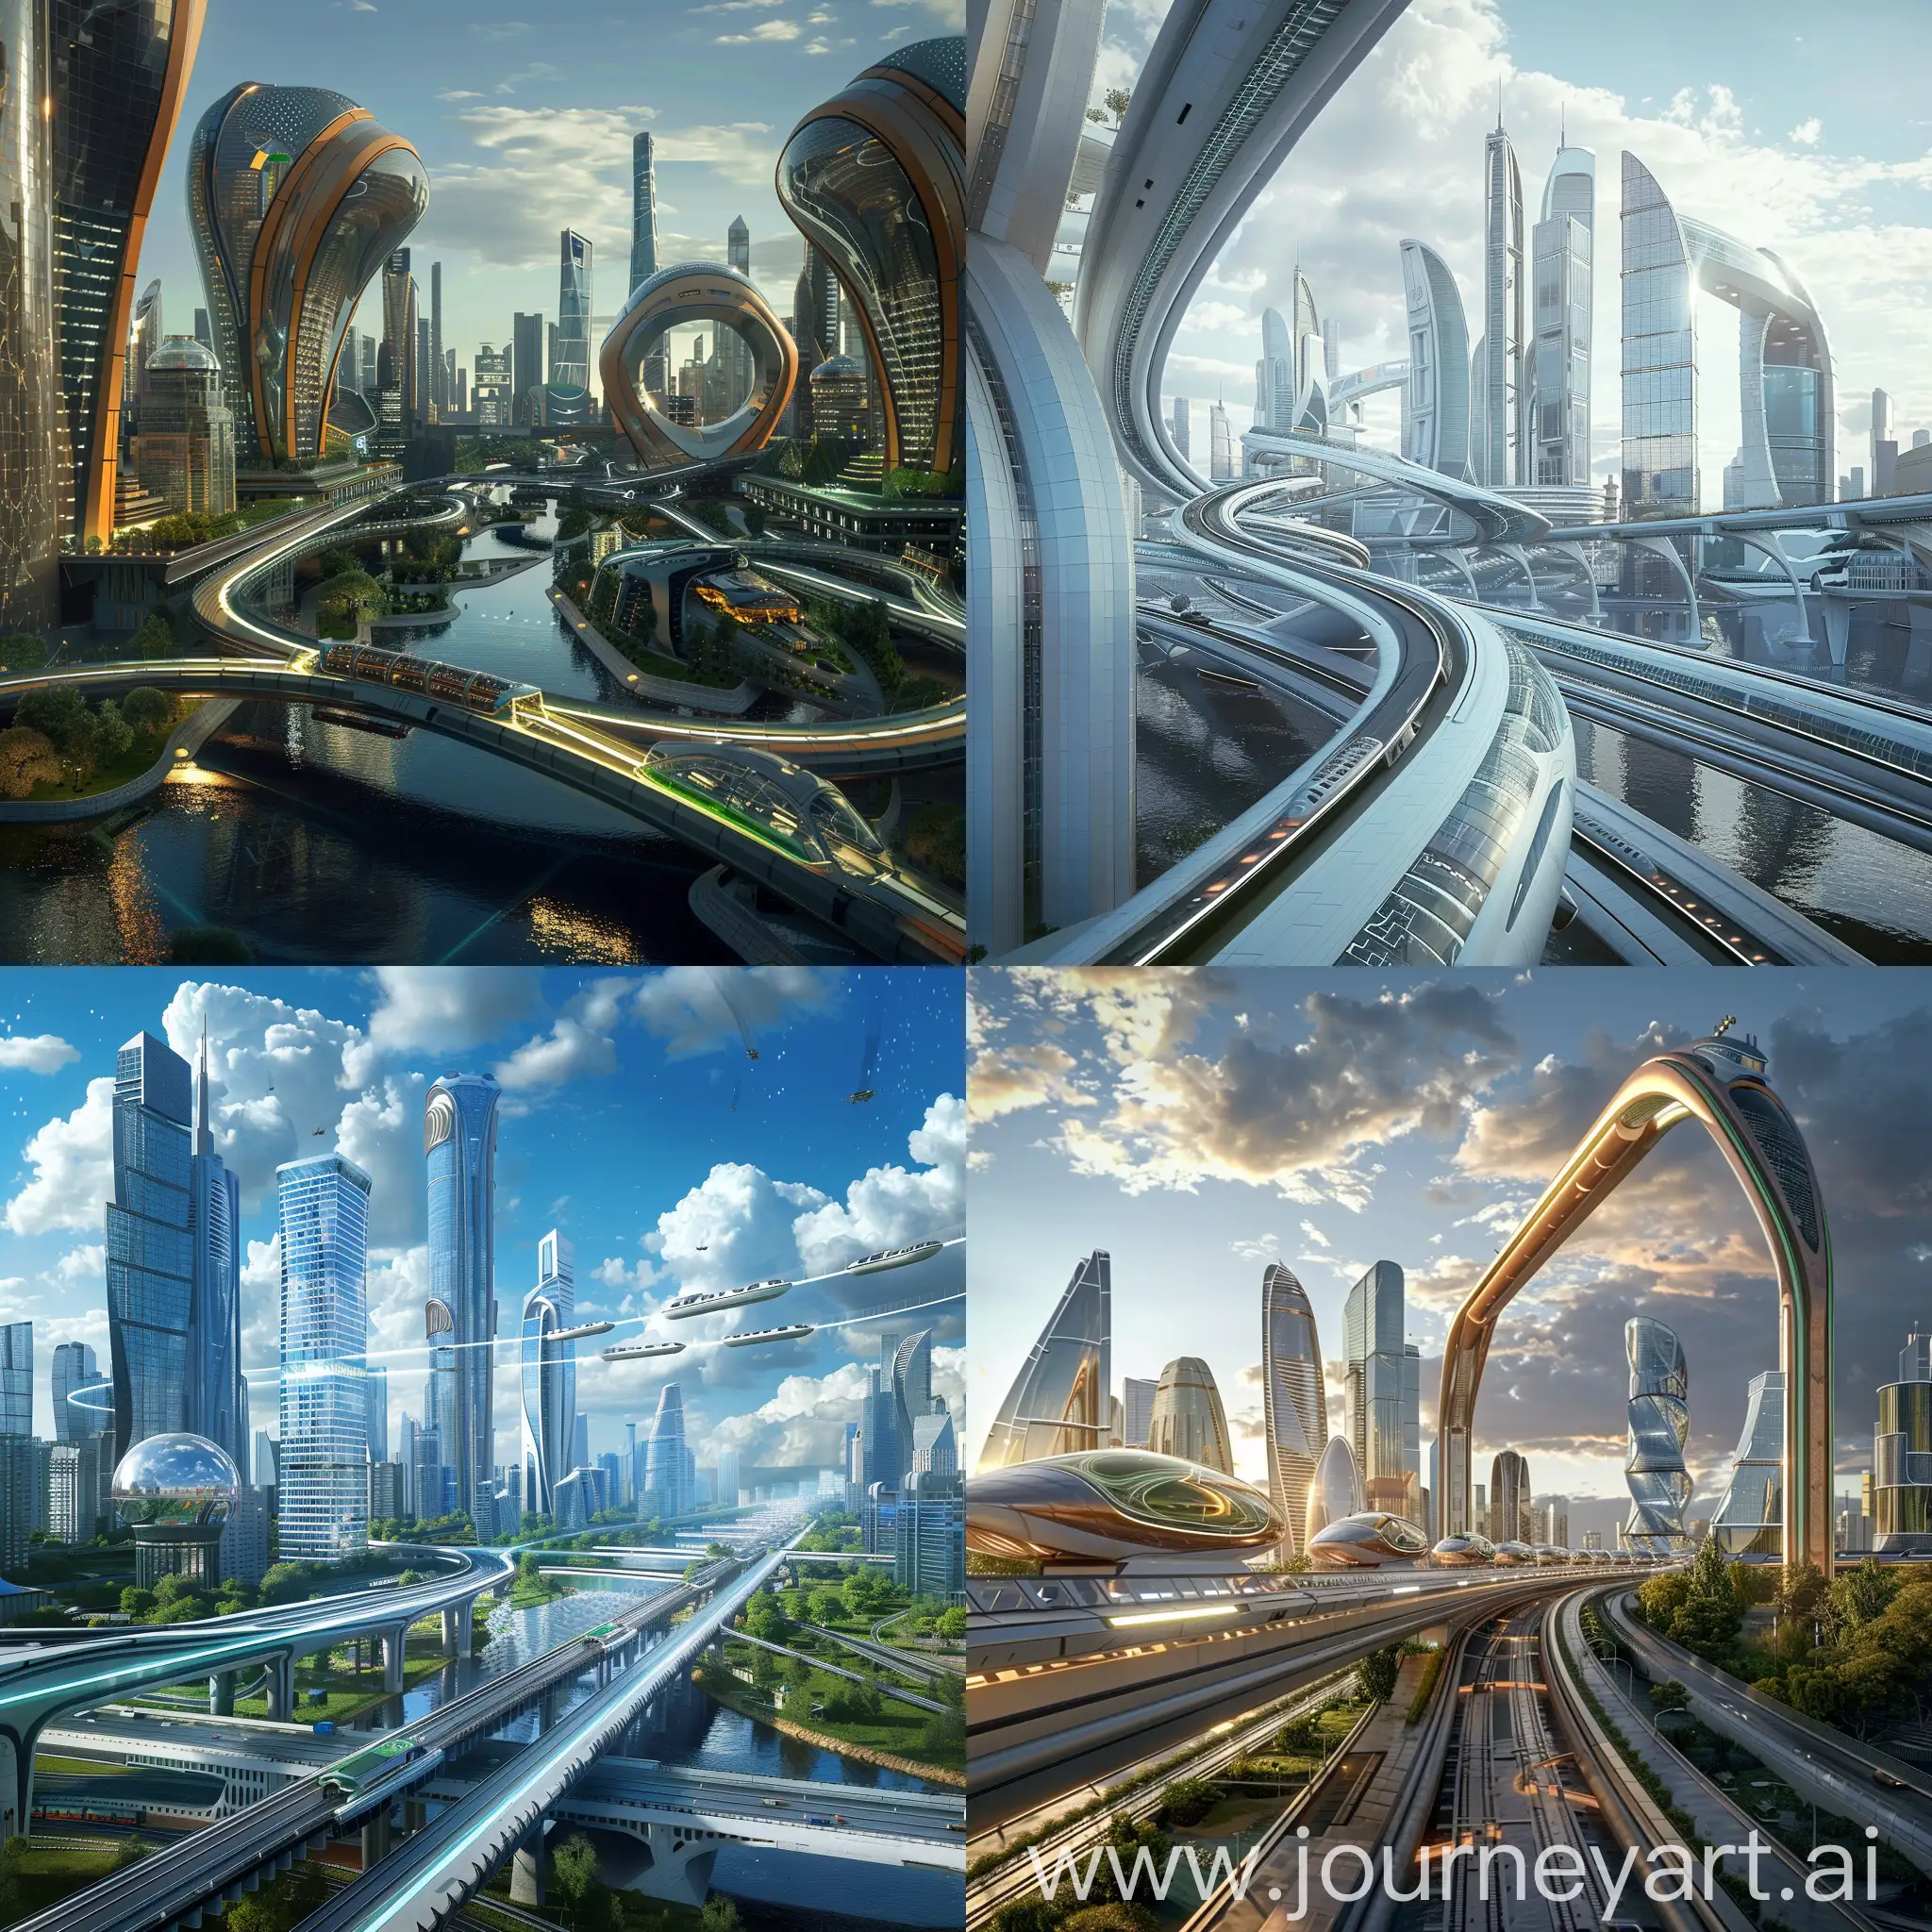 Futuristic-Moscow-Advanced-Science-and-Technology-Hub-with-Smart-Energy-Grids-and-Hyperloop-Transit-Systems